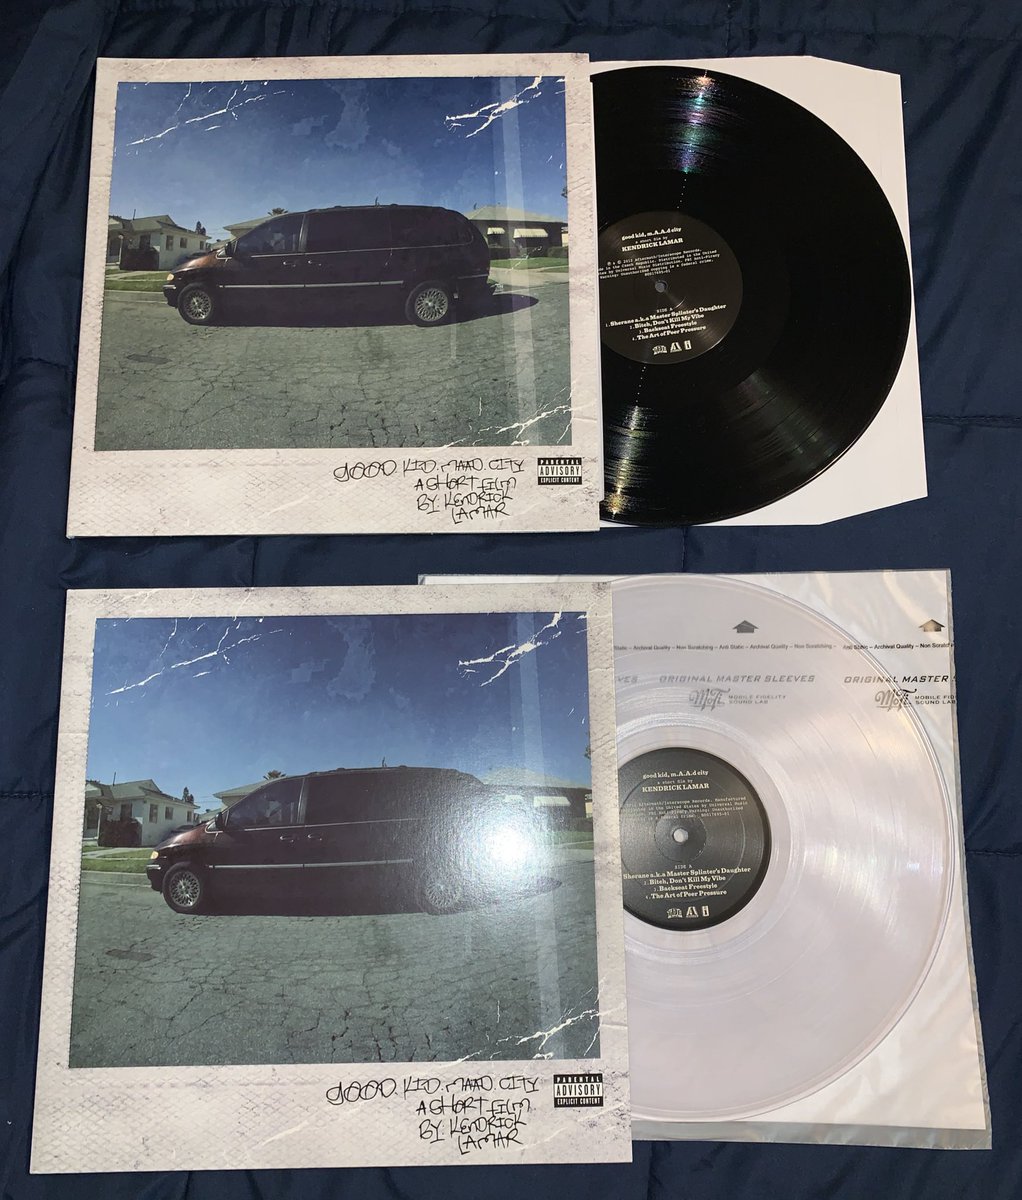 gotta start off with my favorite album of all time, Good Kid Maad City- Kendrick Lamar. since it’s my favorite i had to get the black and clear versions